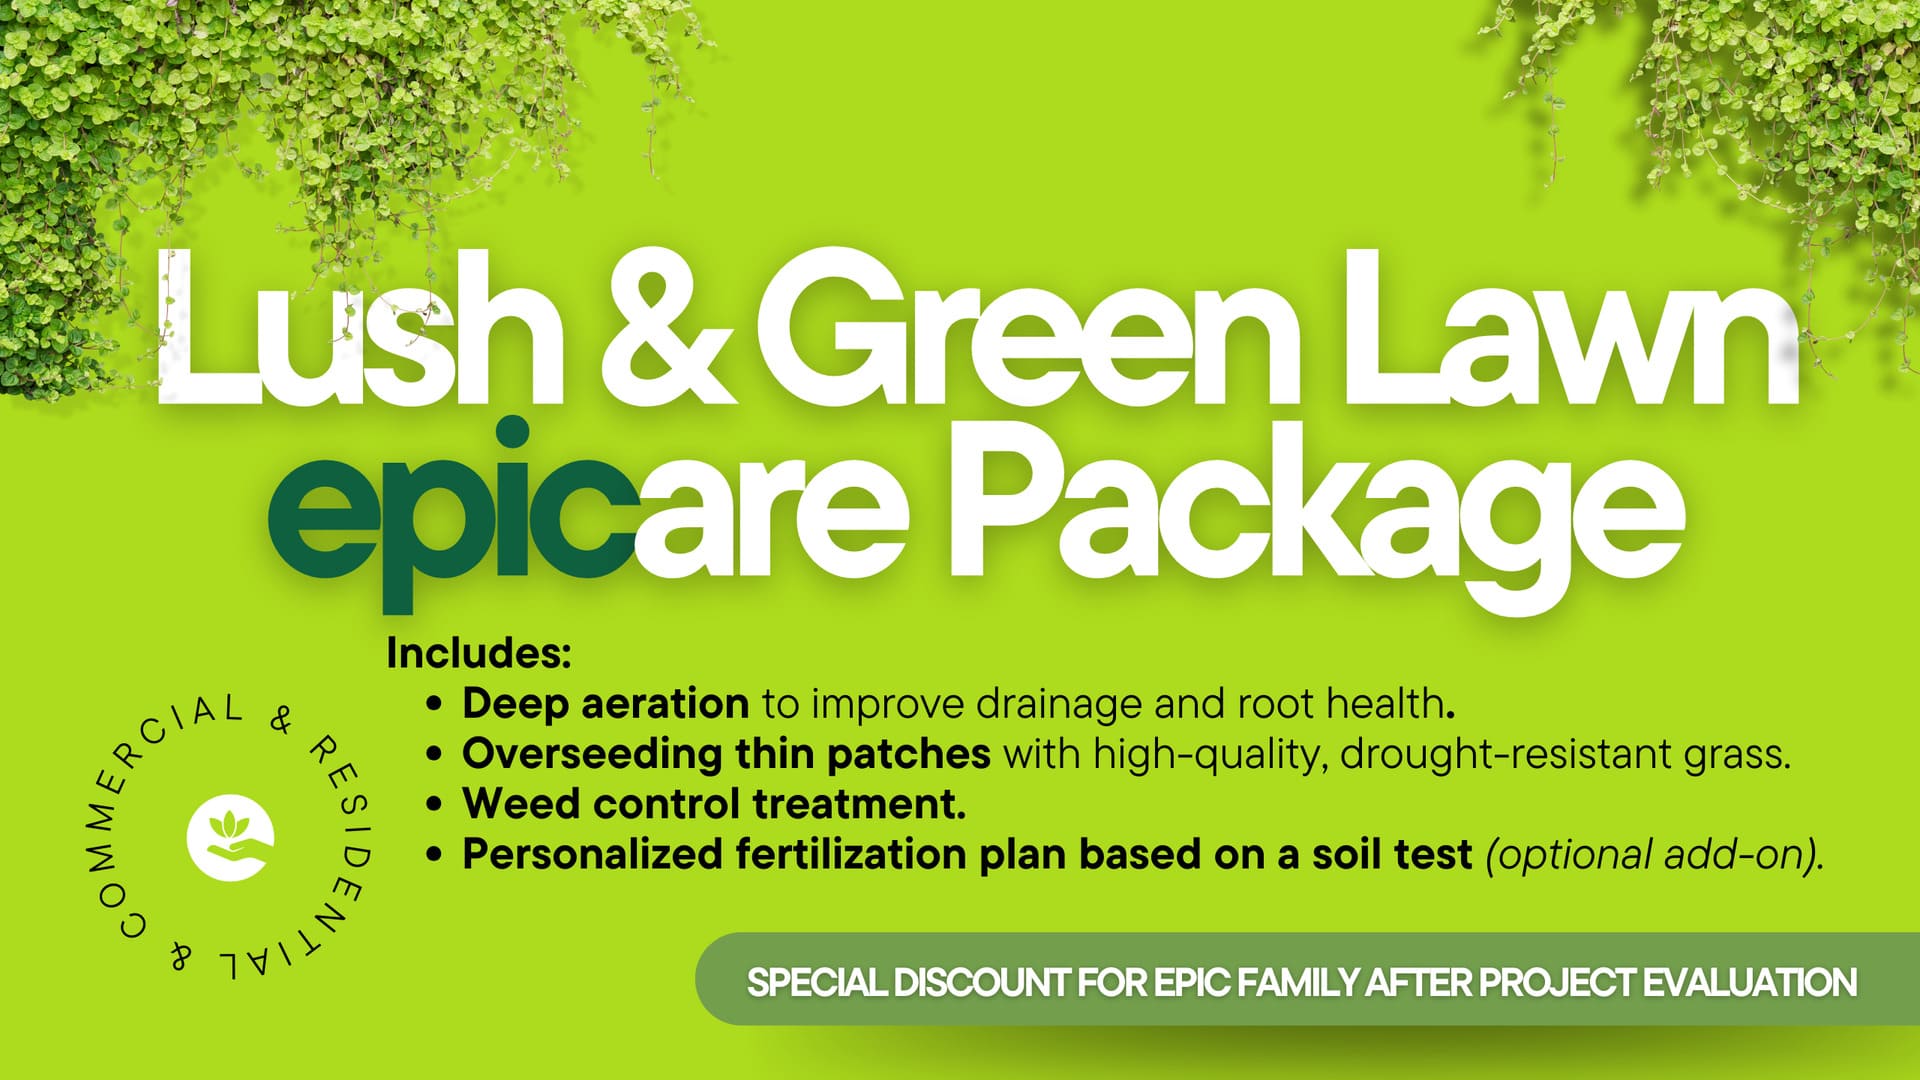 Lush & Green Lawn epicare Package. Includes: Deep aeration to improve drainage and root health. Overseeding thin patches with high-quality, drought-resistant grass. Weed control treatment. Personalized fertilization plan based on a soil test (optional add-on). Special discount for epic family after project evaluation.